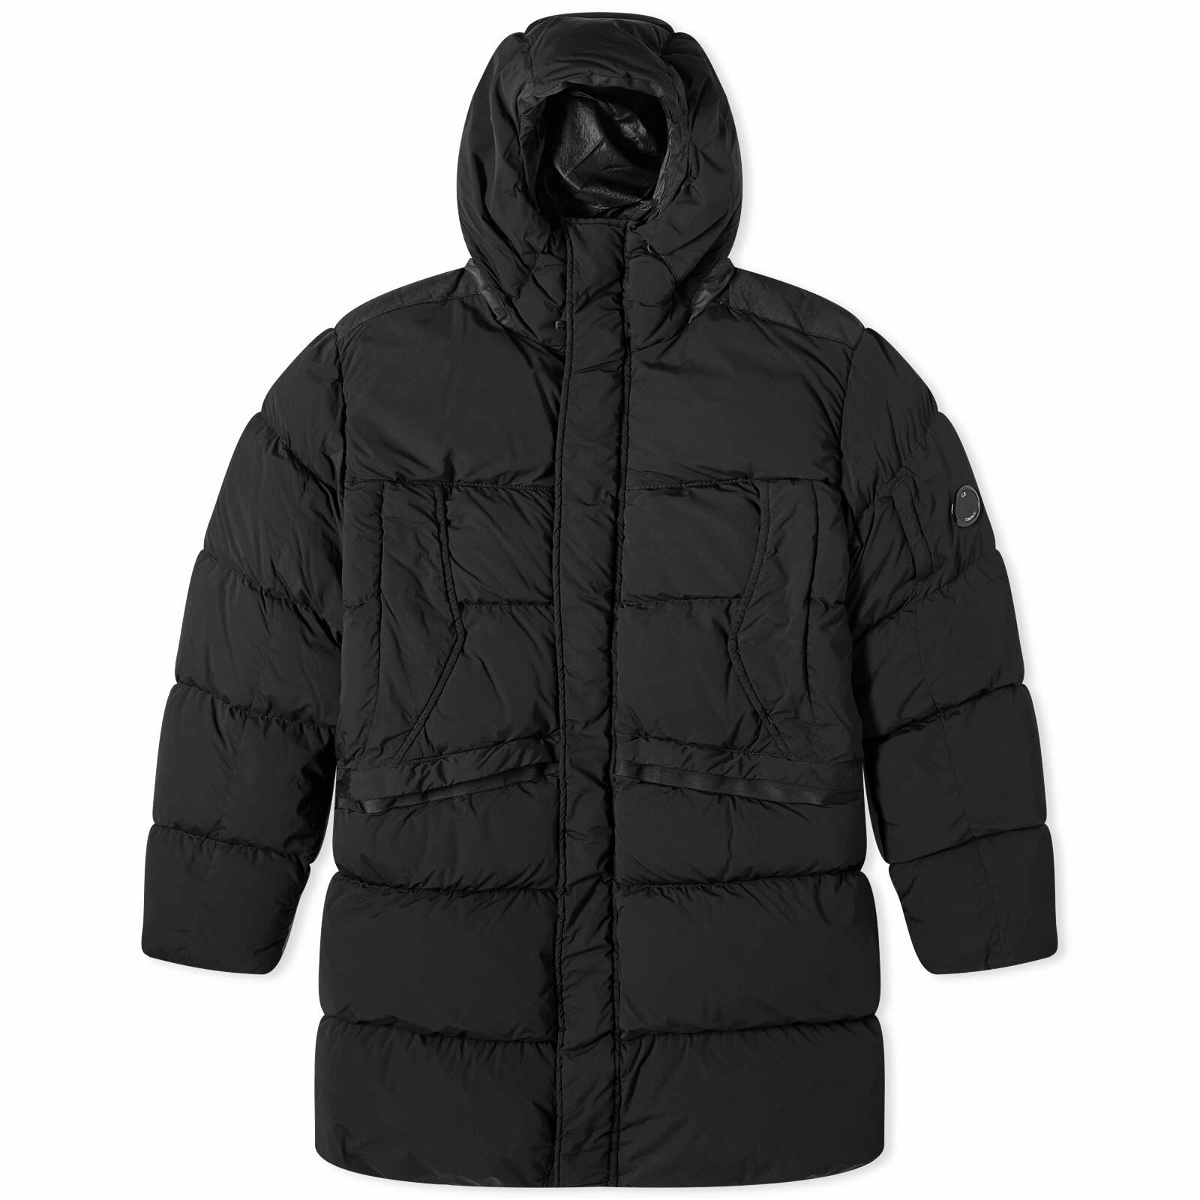 Photo: C.P. Company Men's Nycra Hooded Down Parka Jacket in Black